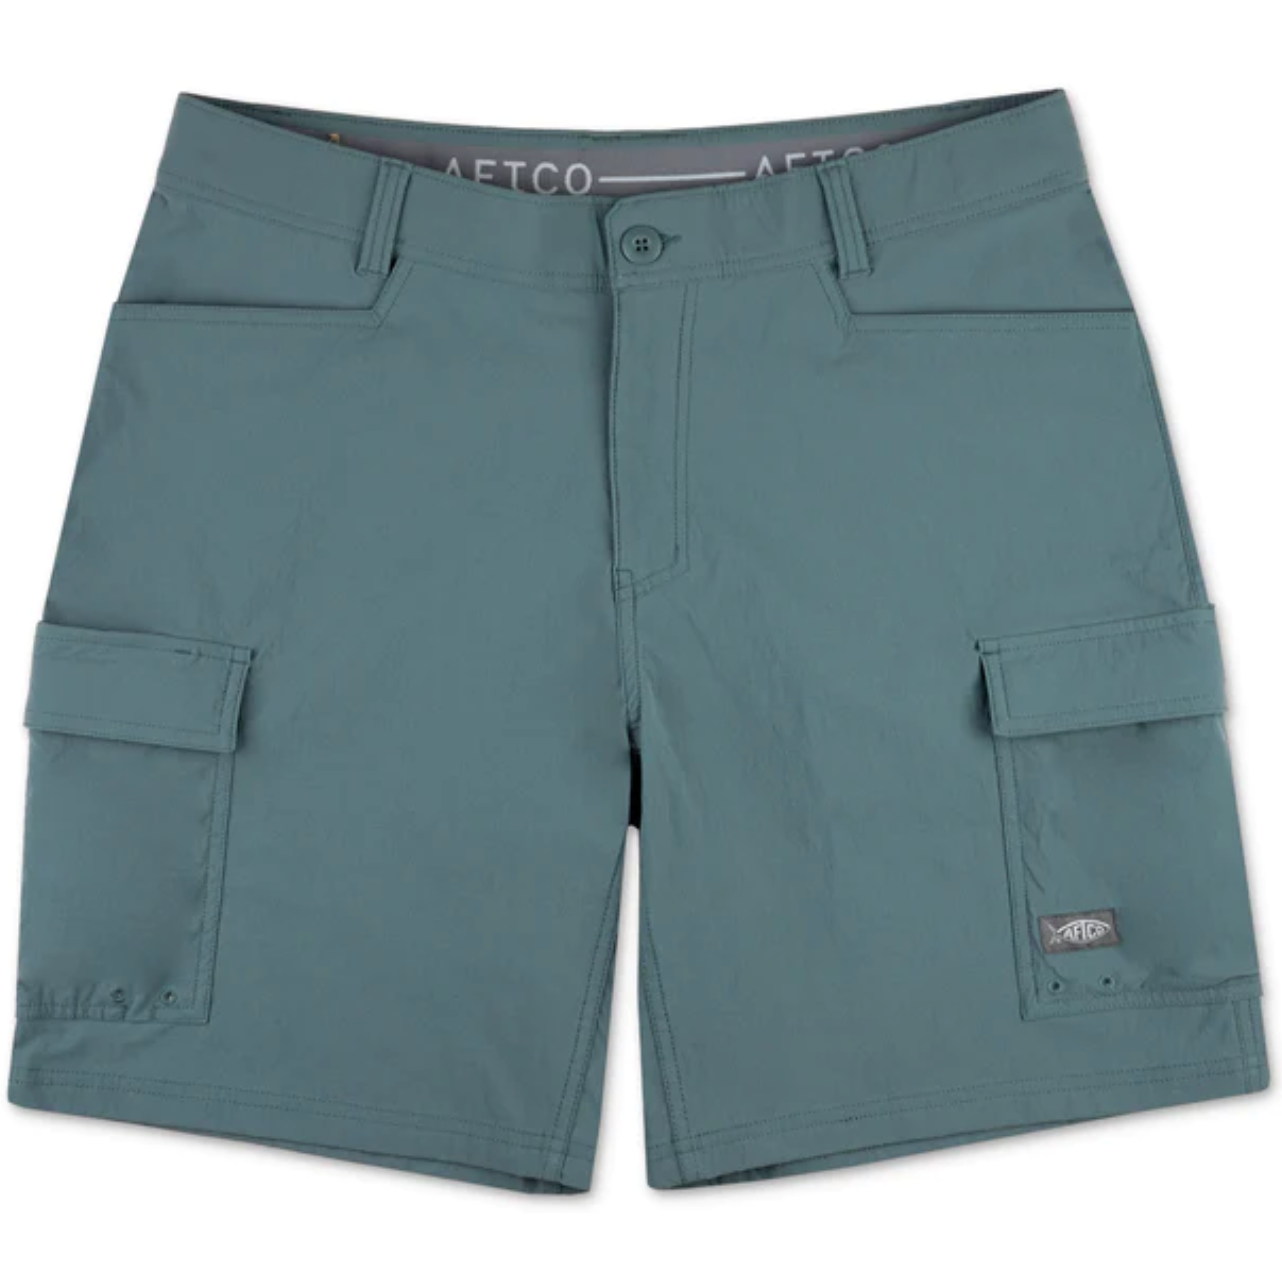 AFTCO Deckhand Shorts